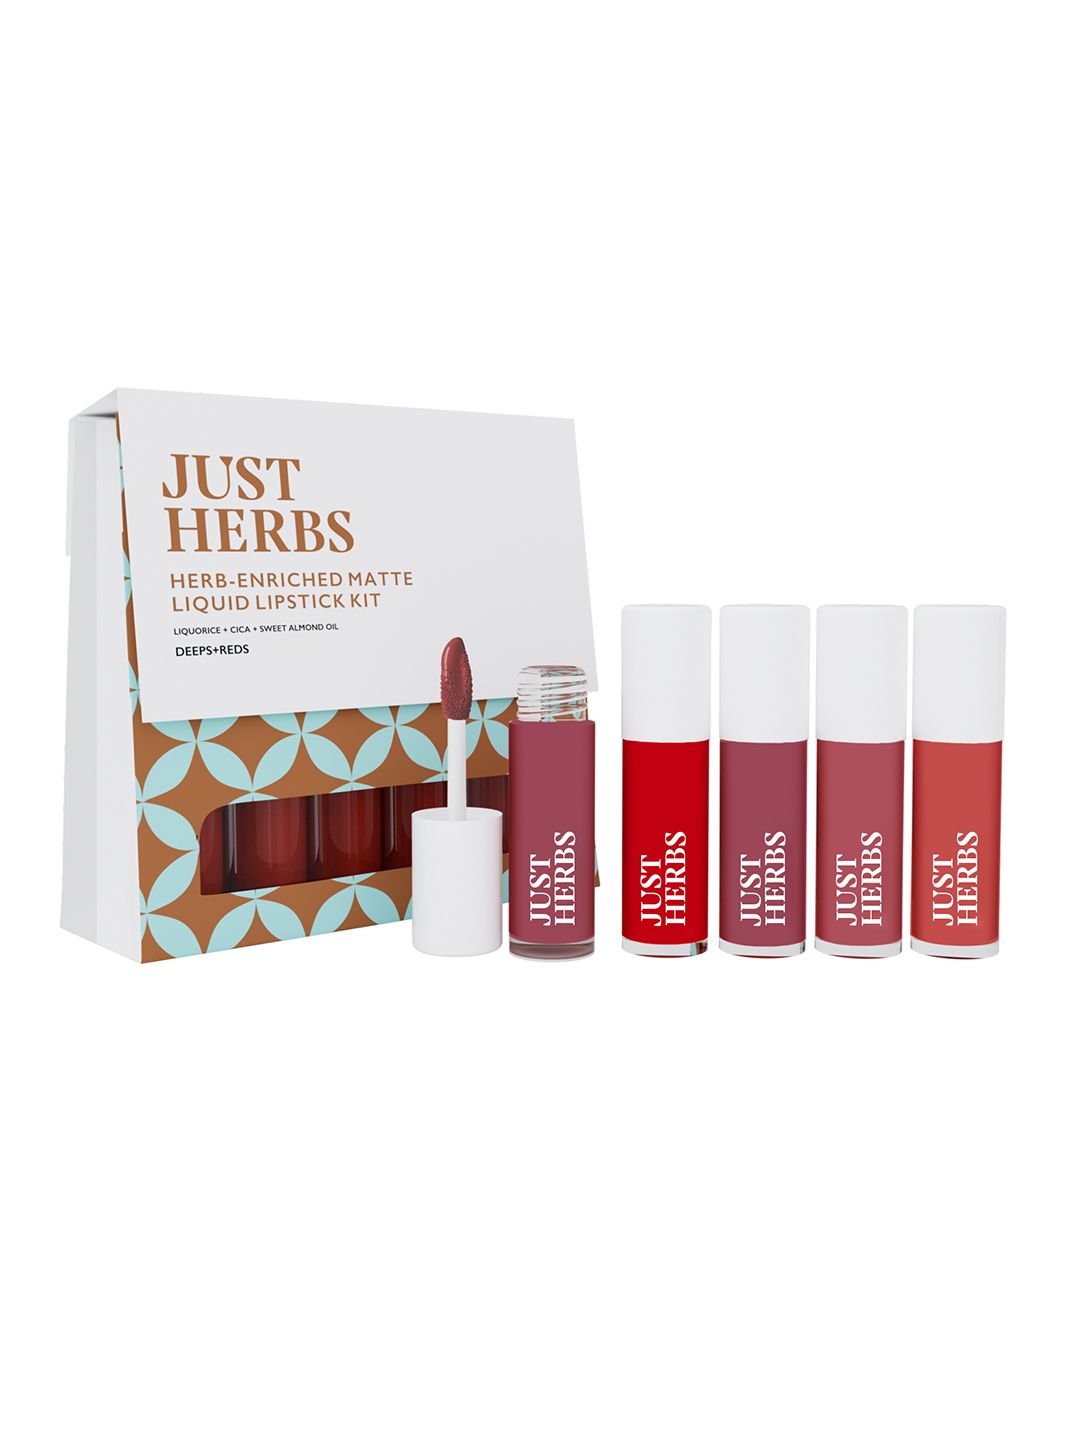 Just Herbs Mini Herb-Enriched Matte Liquid Lipstick Kit - Set of 5 - Deeps & Reds Price in India